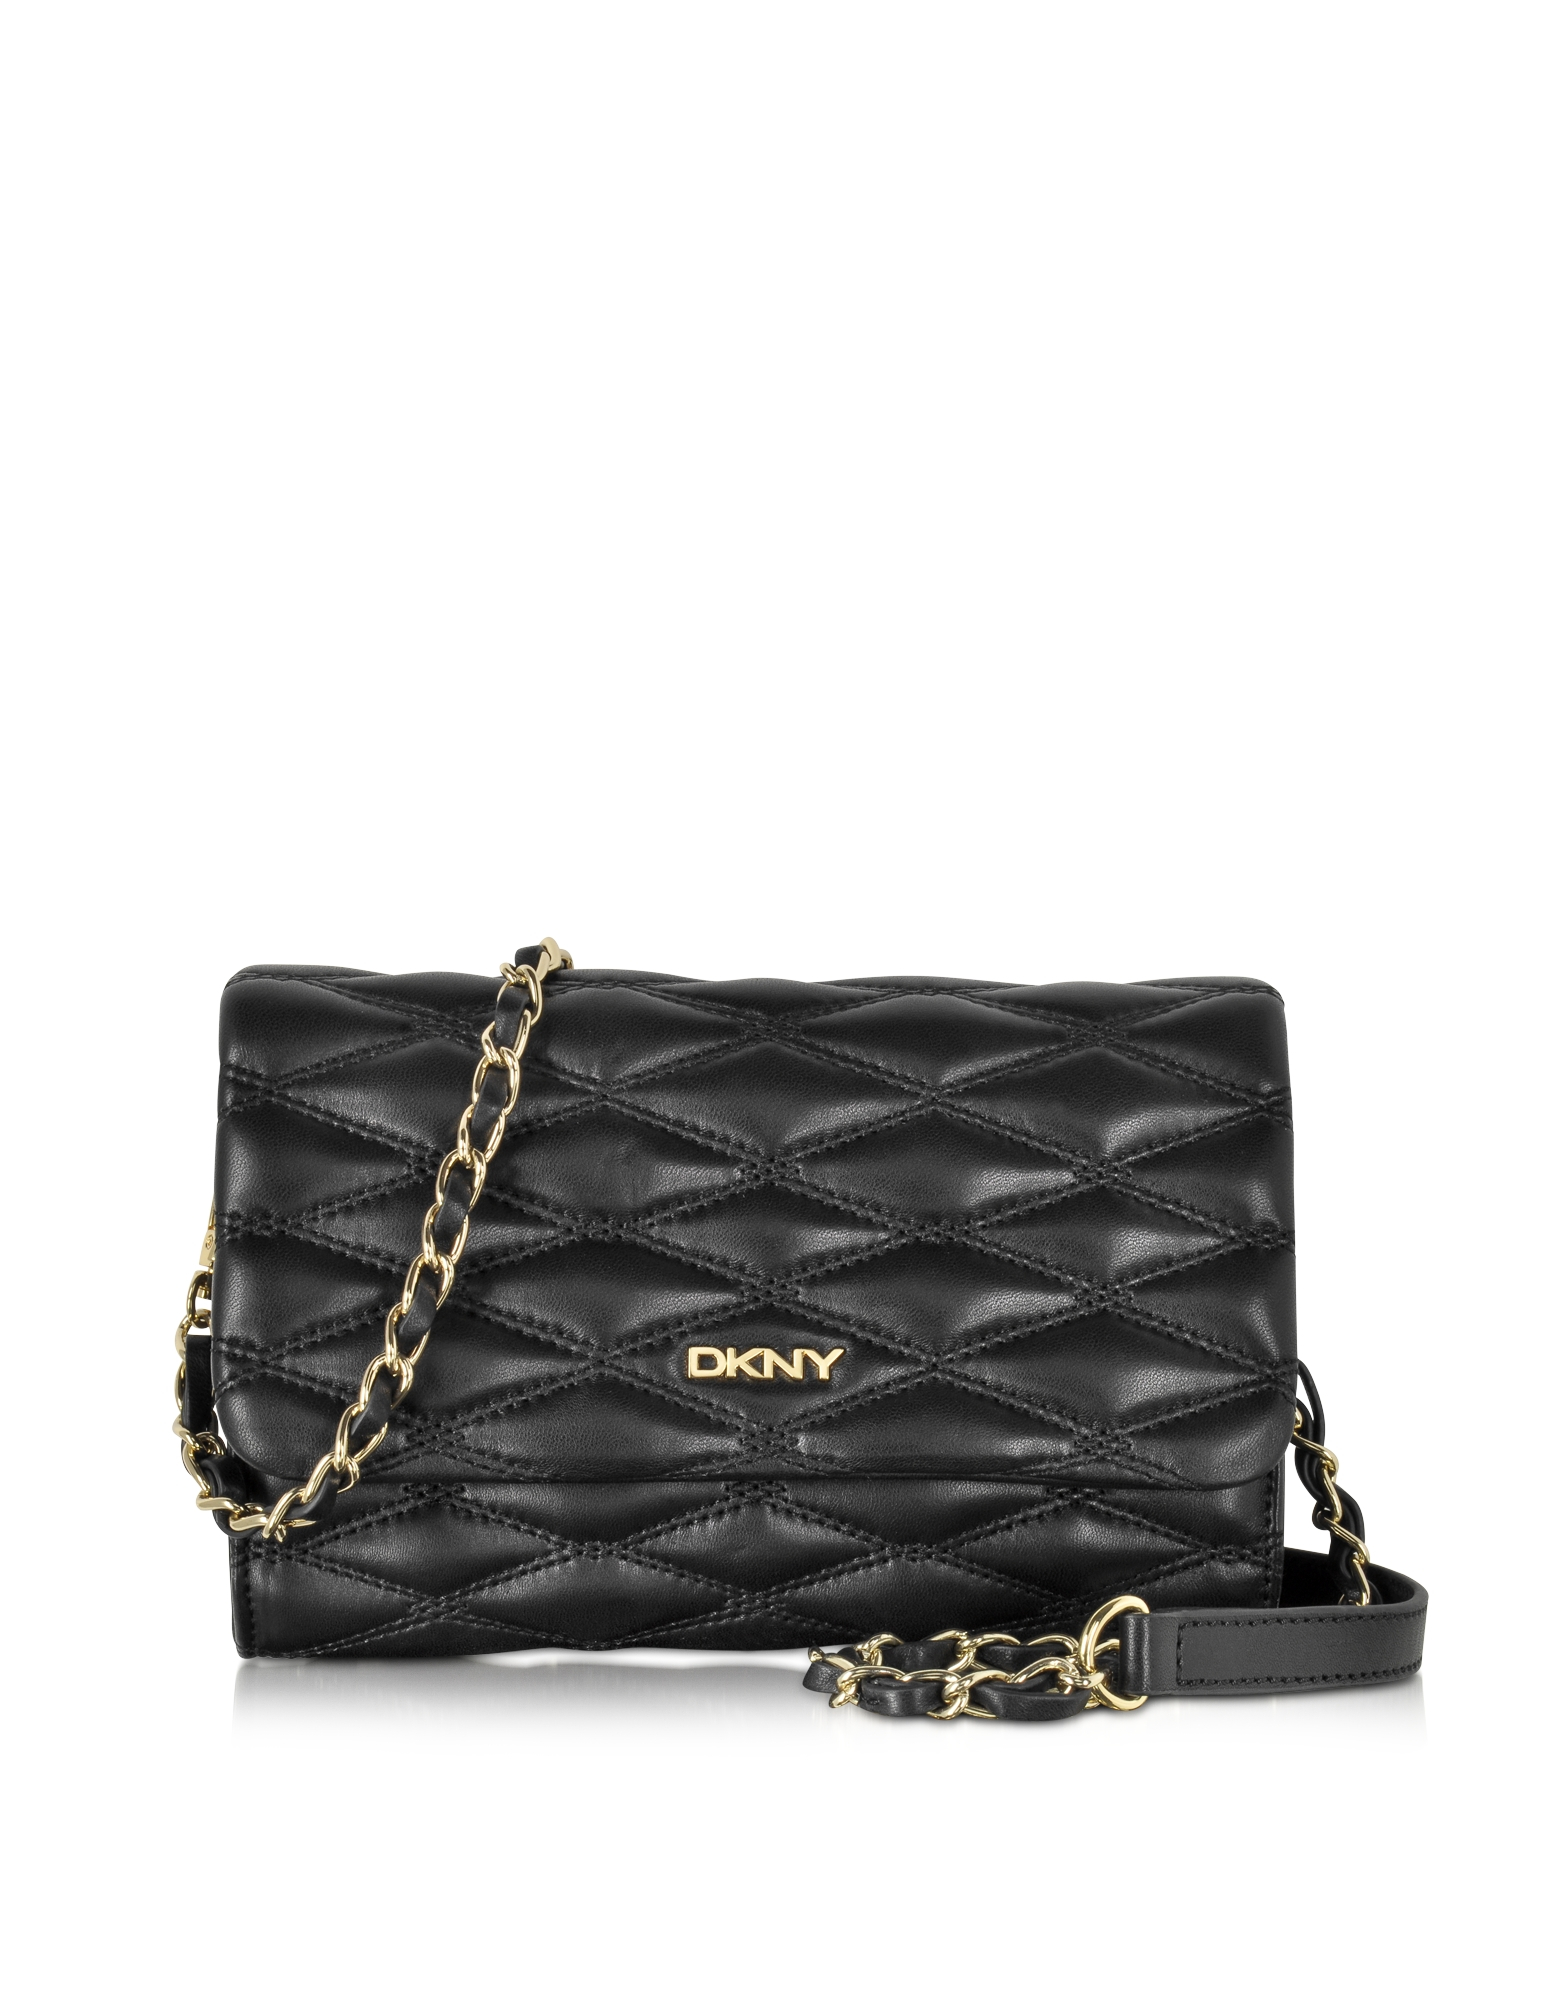 Dkny Black Quilted Leather Small Flap Crossbody Bag in Black | Lyst